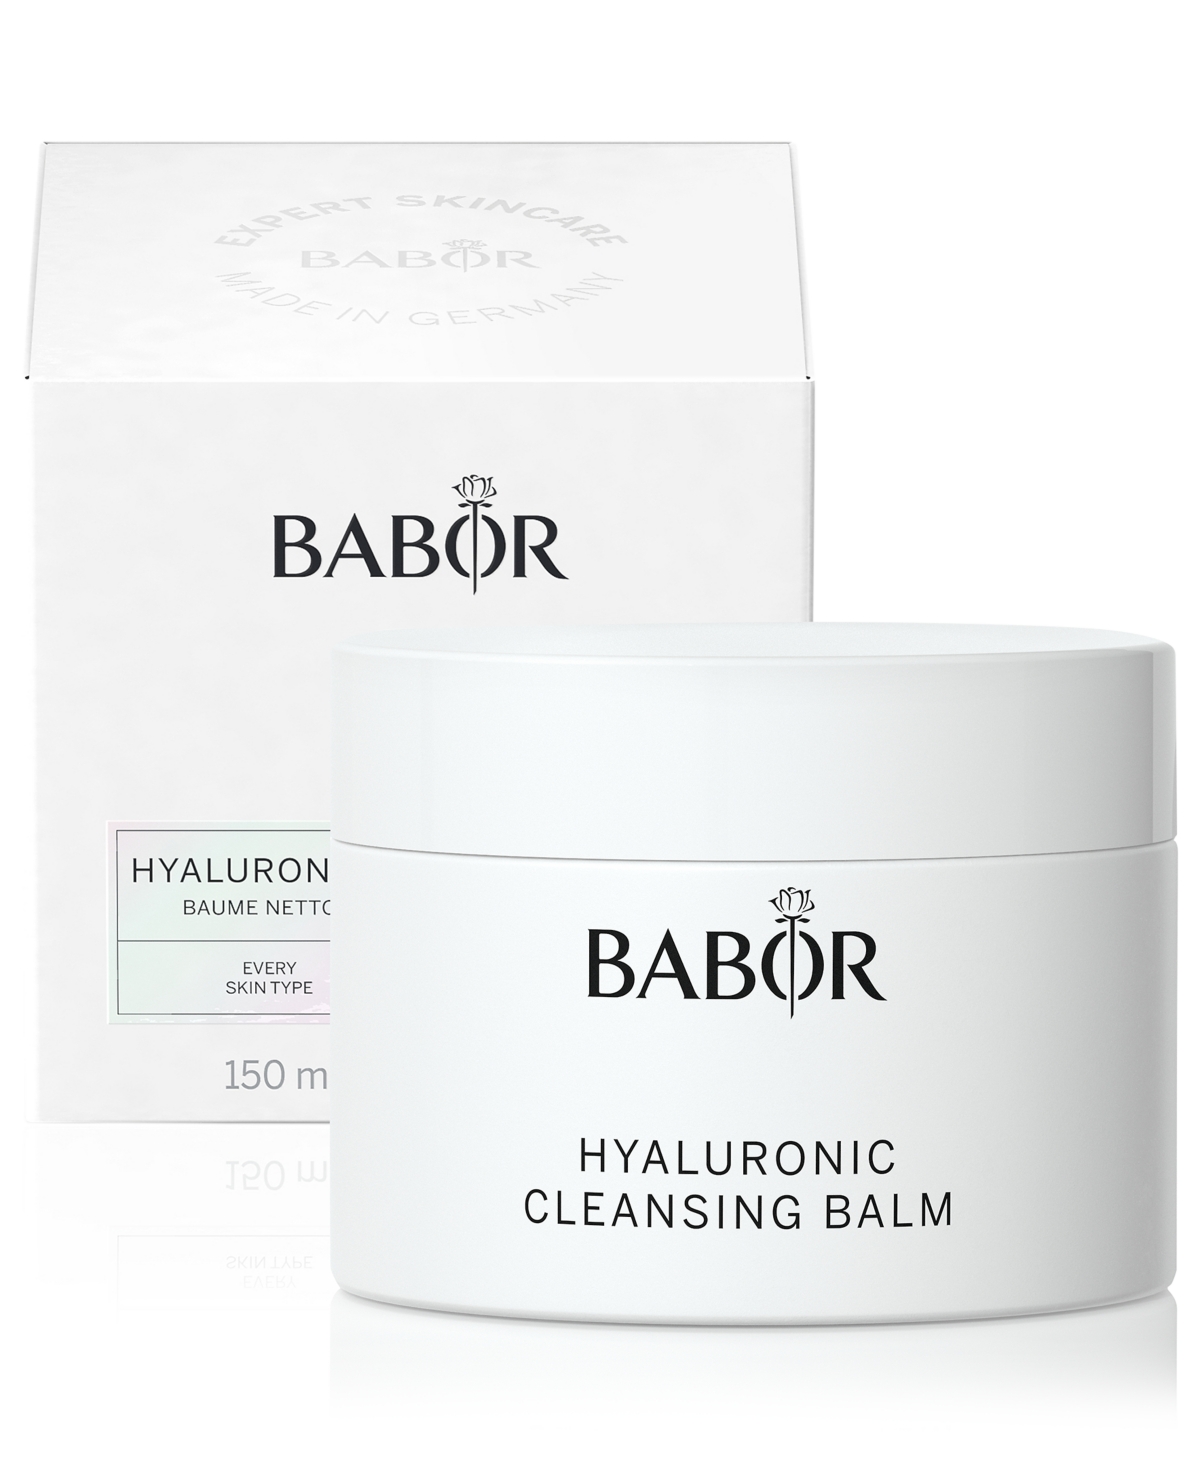 Hyaluronic Cleansing Balm, 5.3 oz.